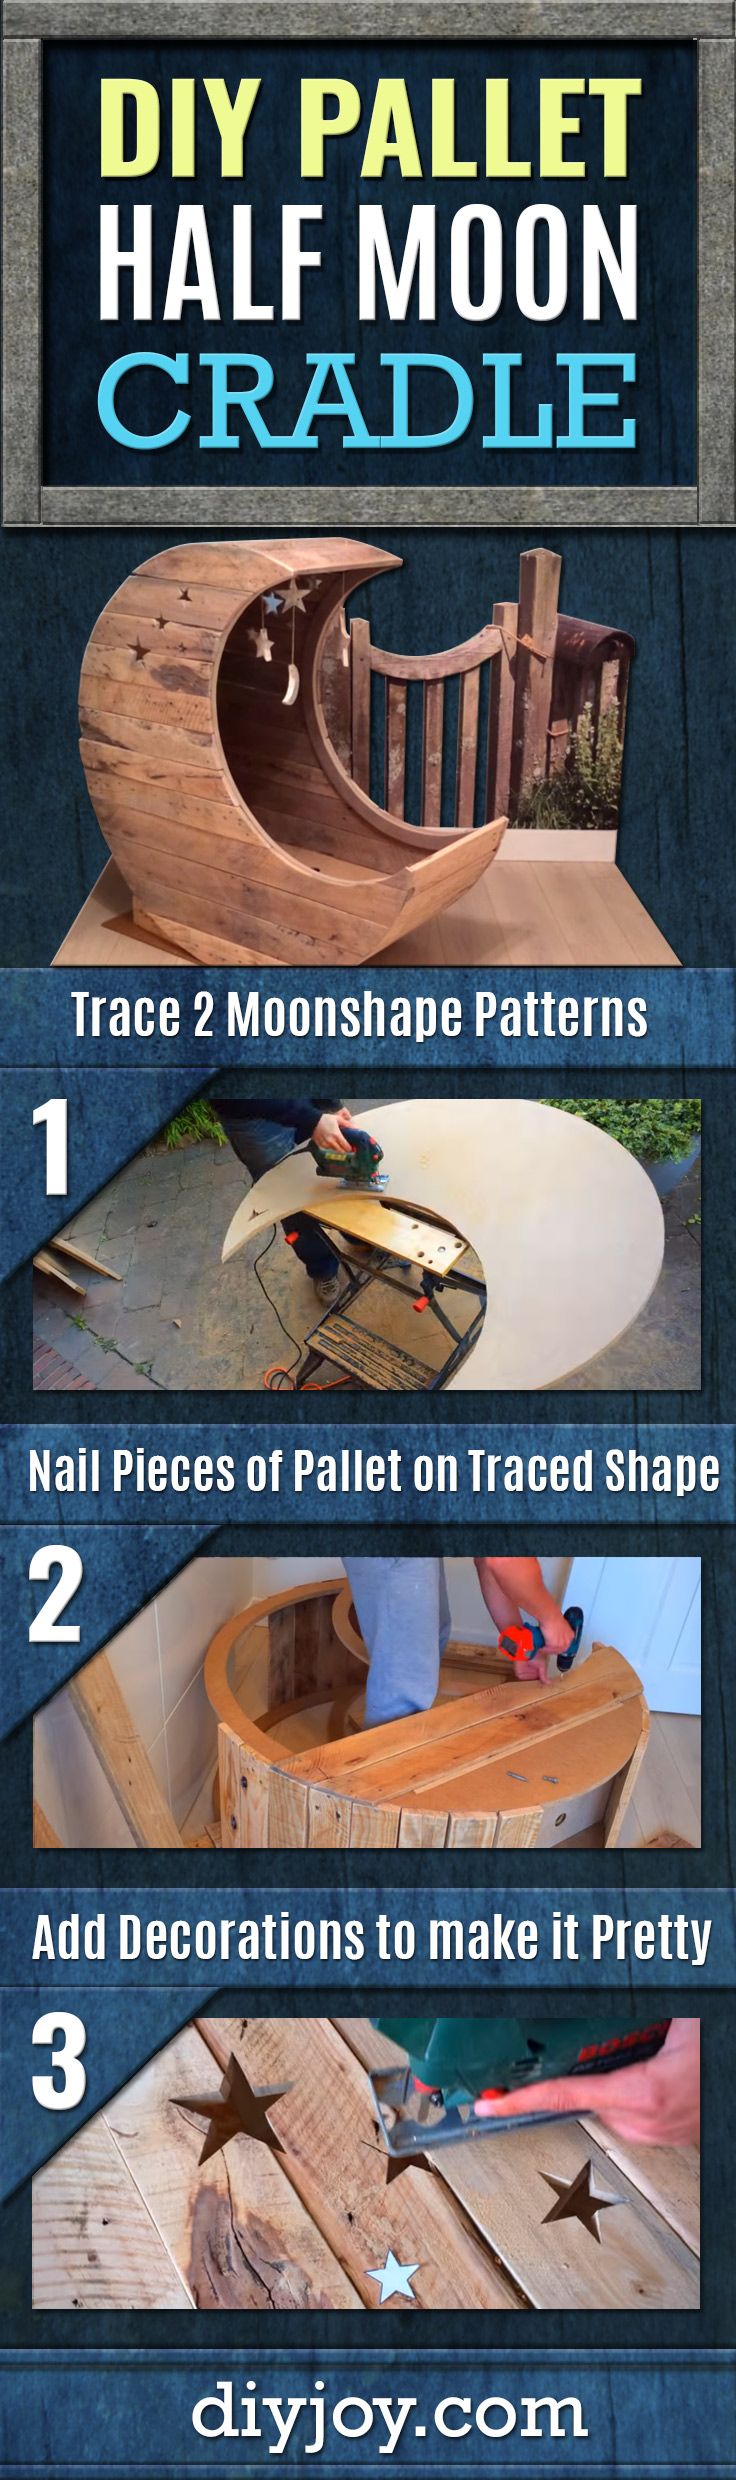 Make This Pallet Half Moon Cradle For That Special Baby